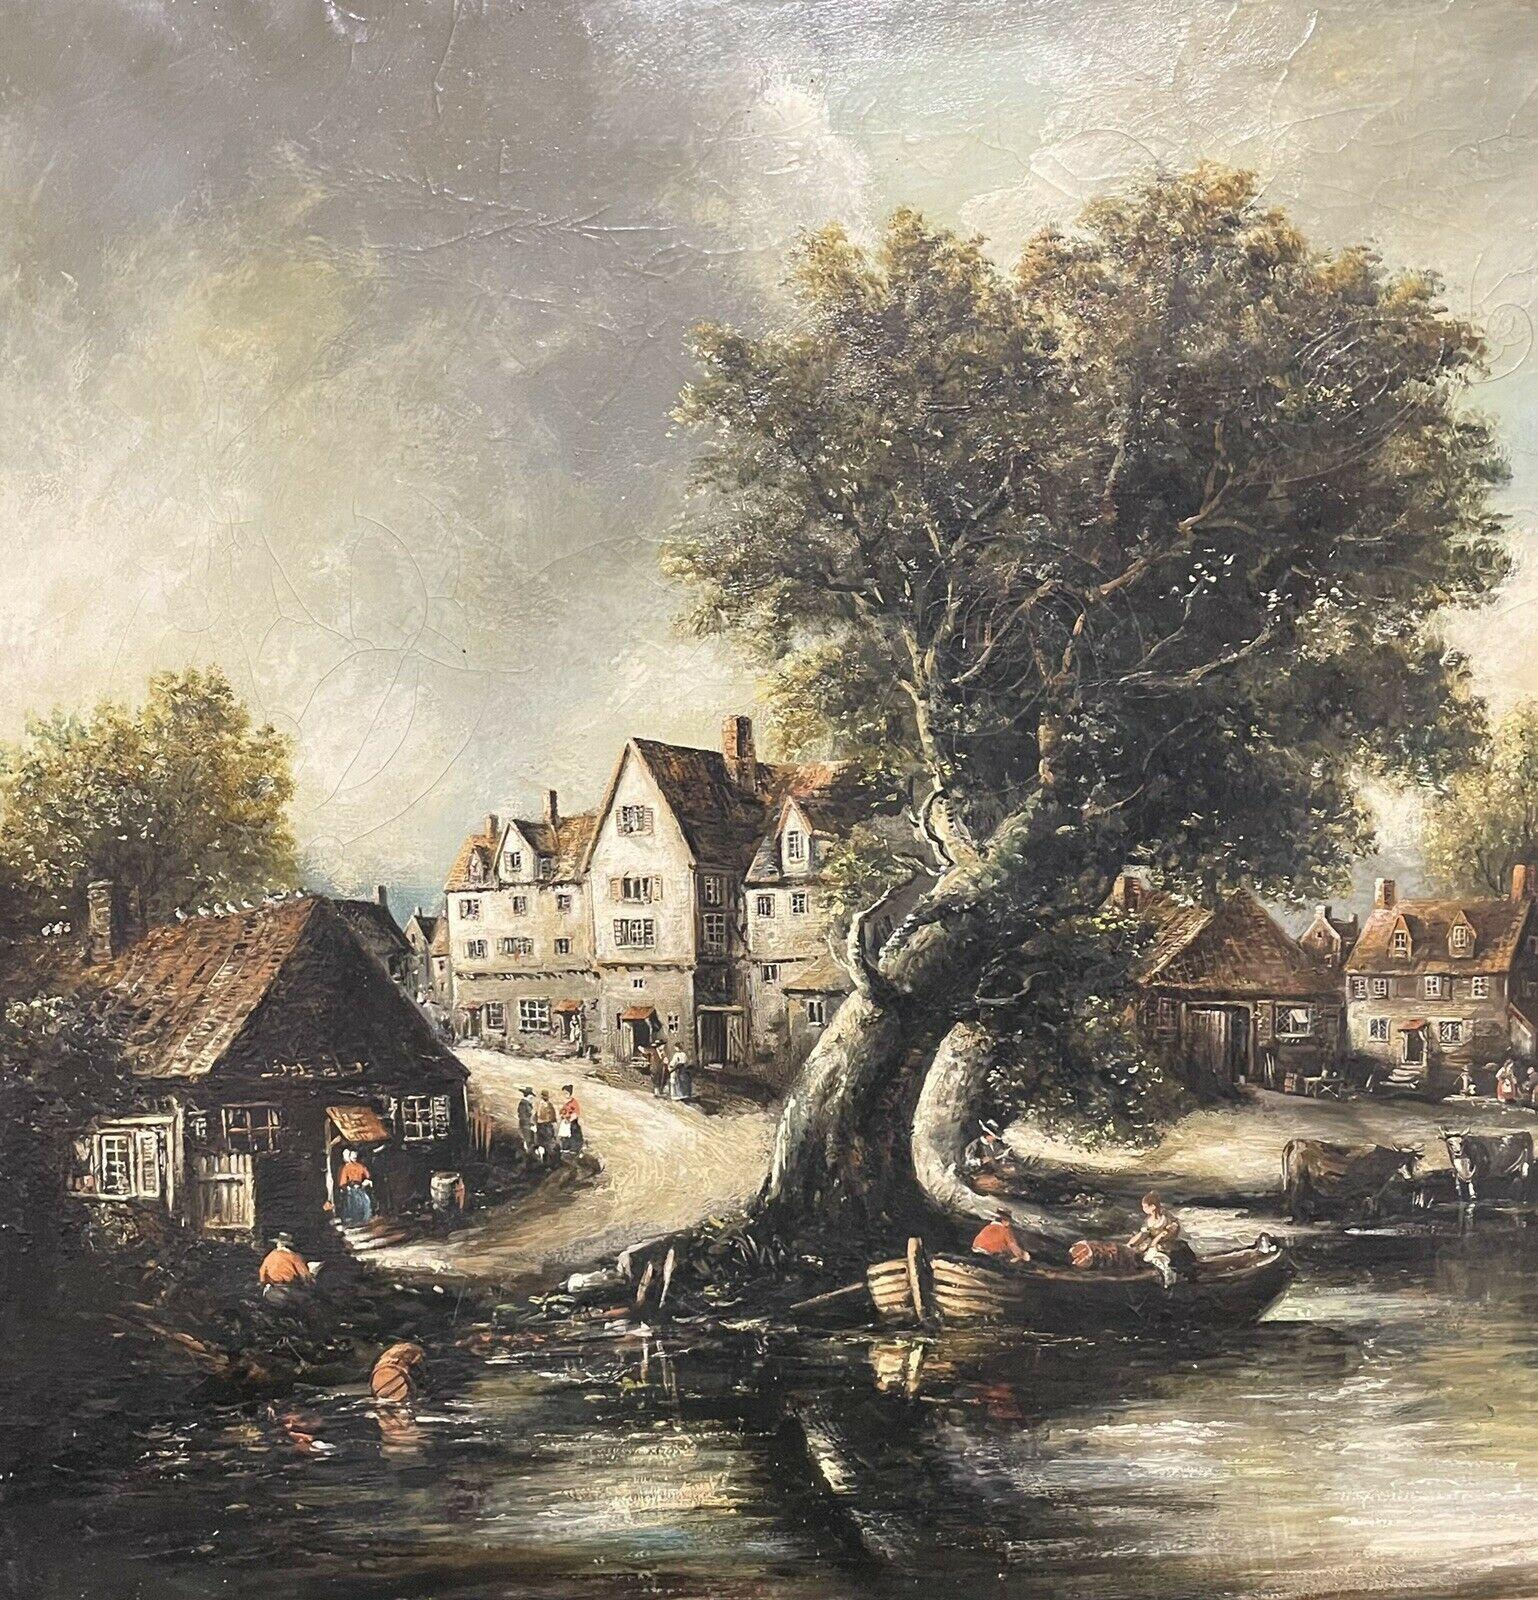 HUGE ANTIQUE BRITISH OIL PAINTING RIVER LANDSCAPE & BUILDINGS - SIGNED RIMA - Beige Landscape Painting by Norman French